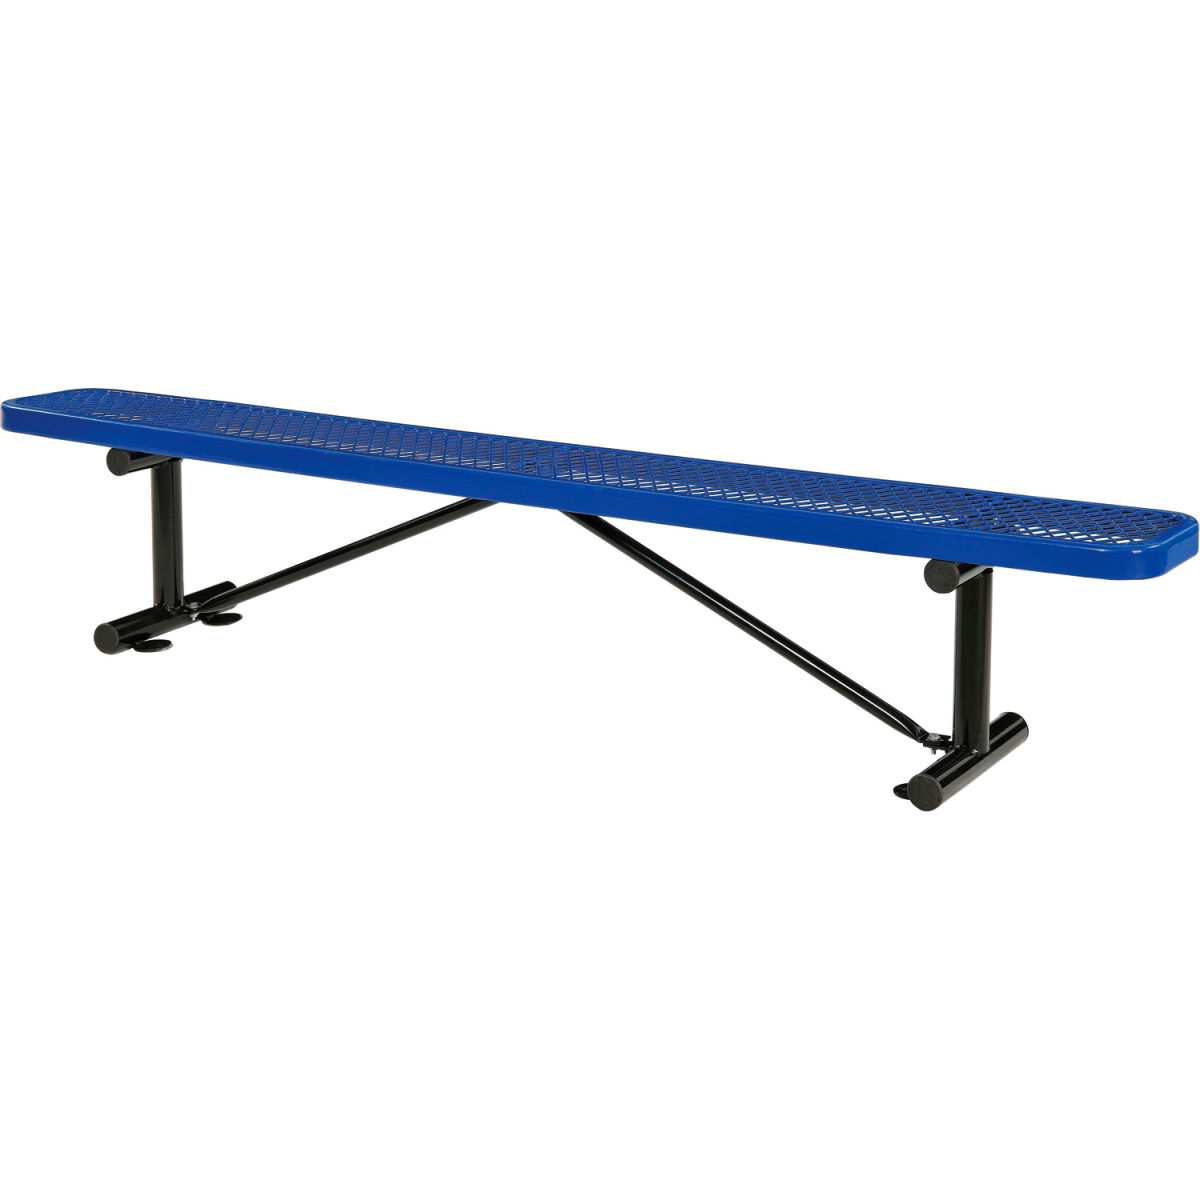 Picture of Global Industrial 3321518 8 ft. Outdoor Steel Flat Bench with Expanded Metal - Blue